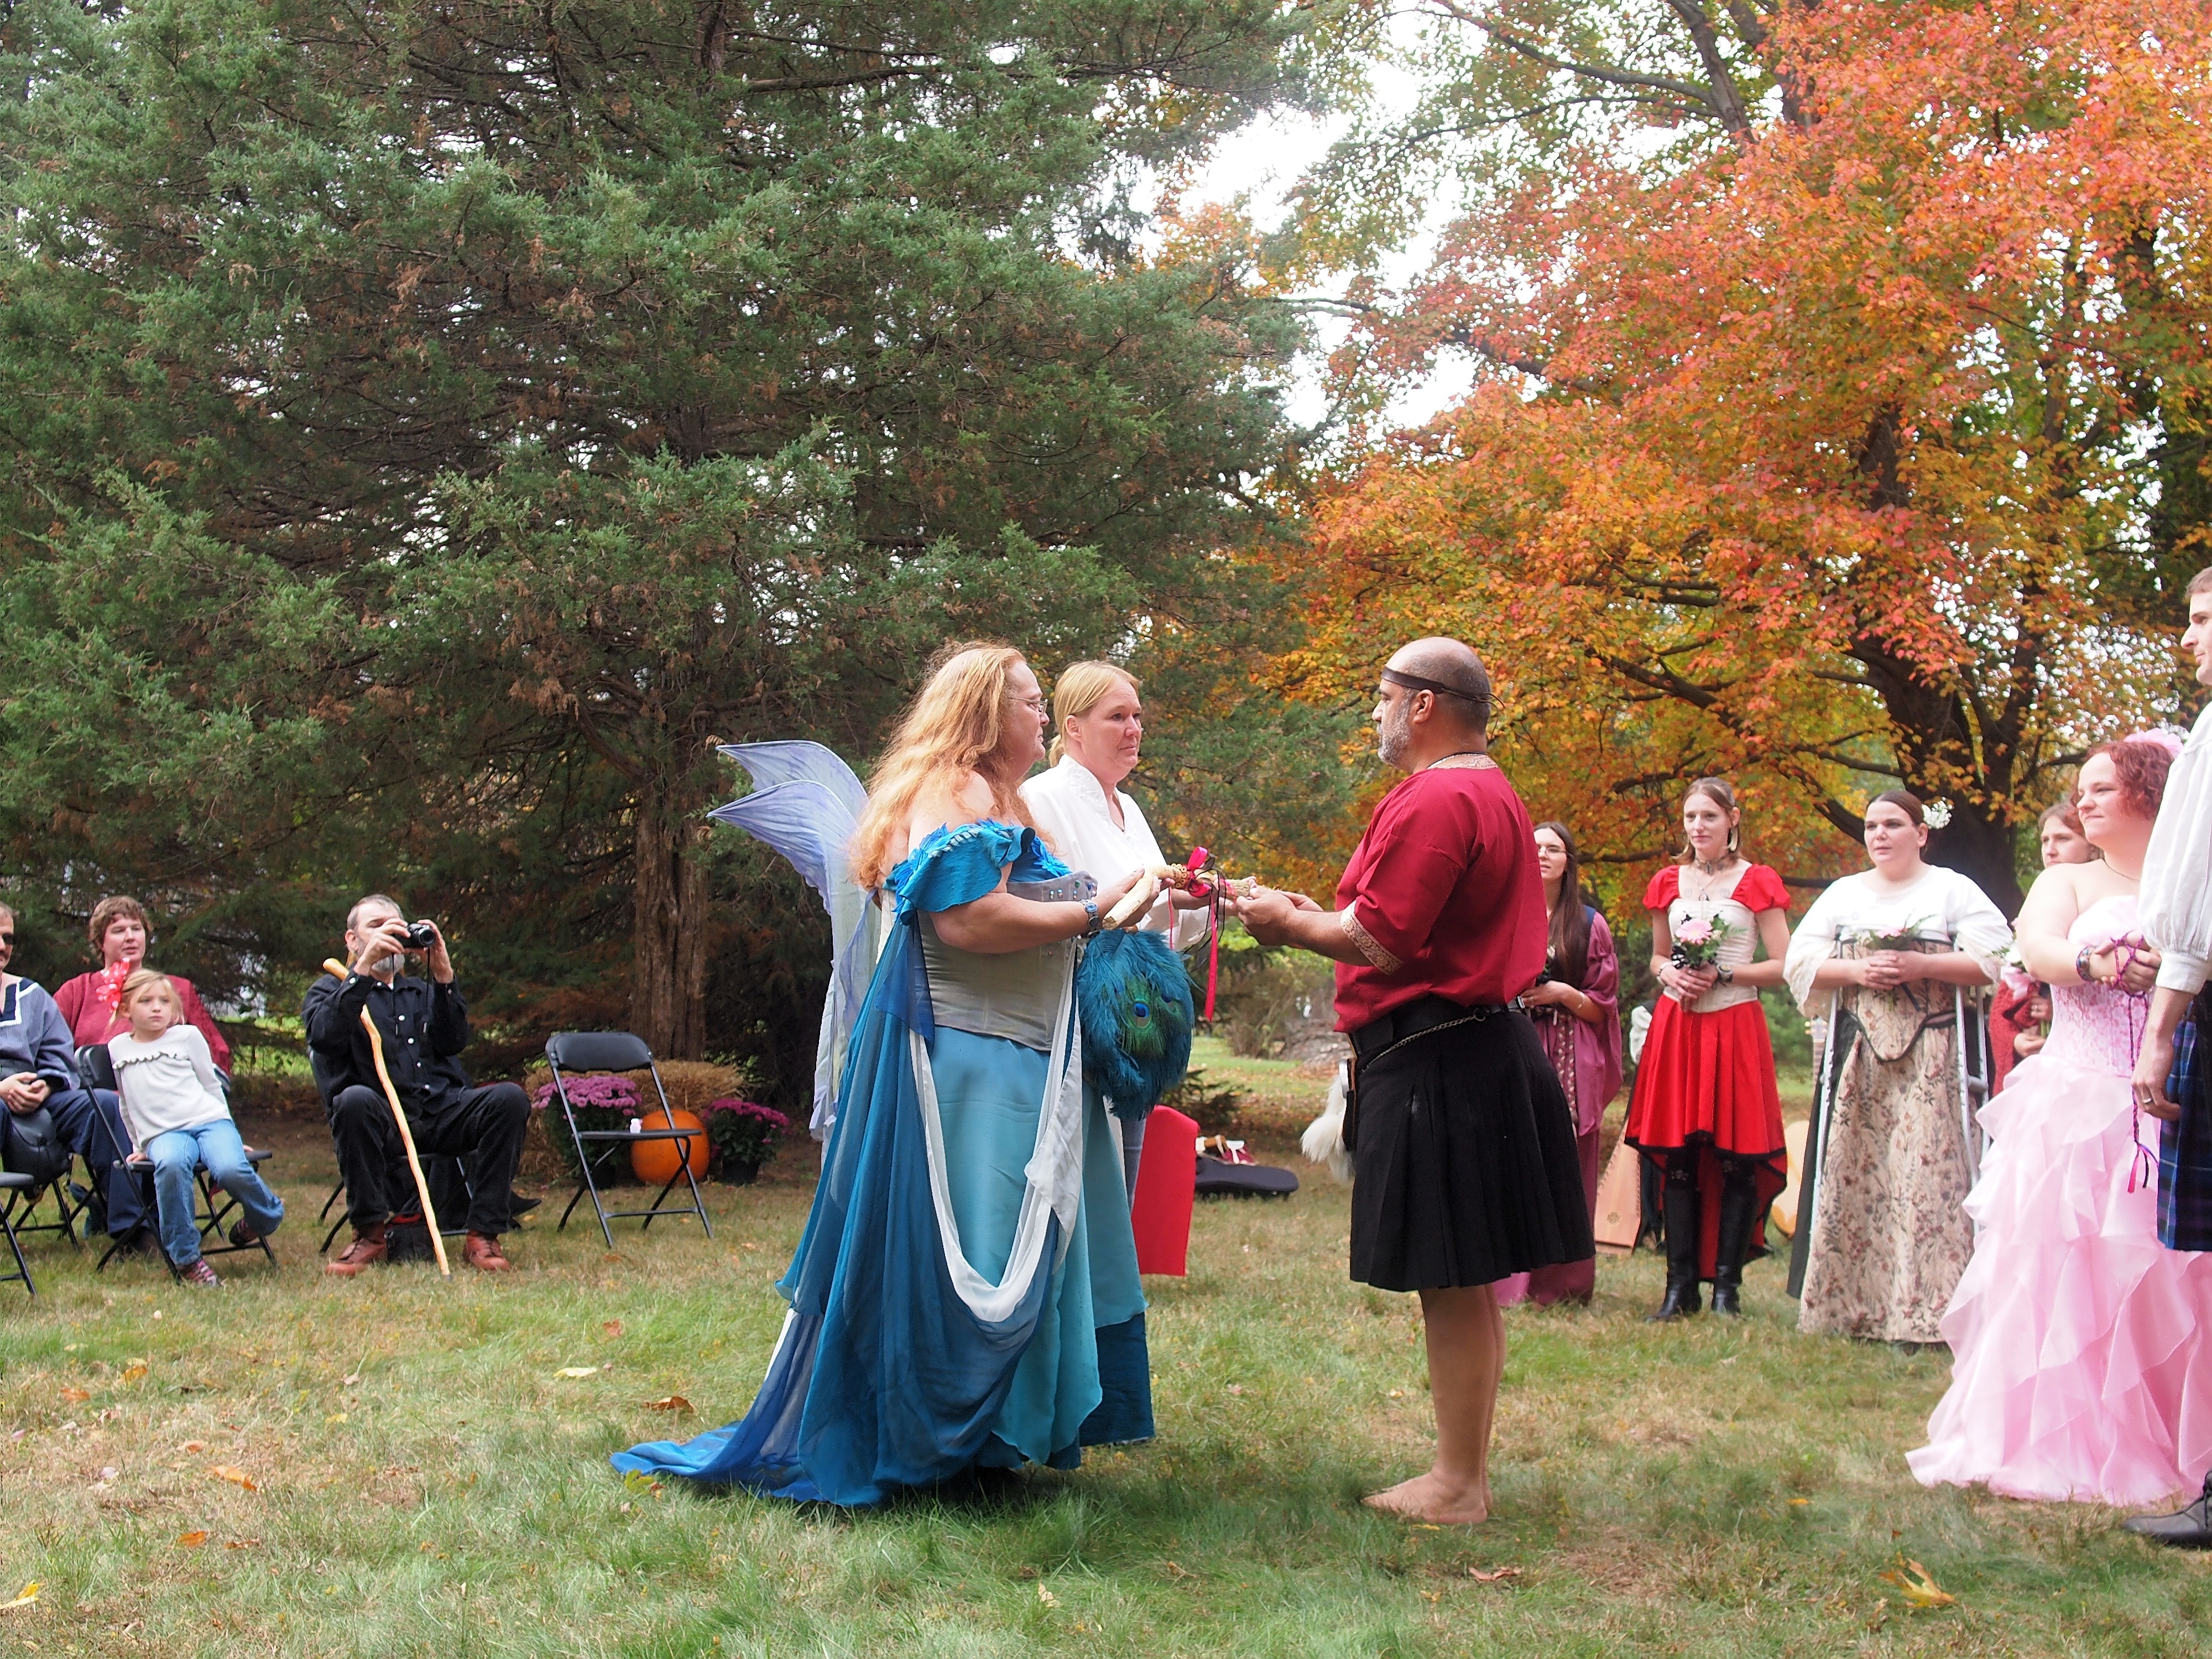 The hand fasting ceremony #18